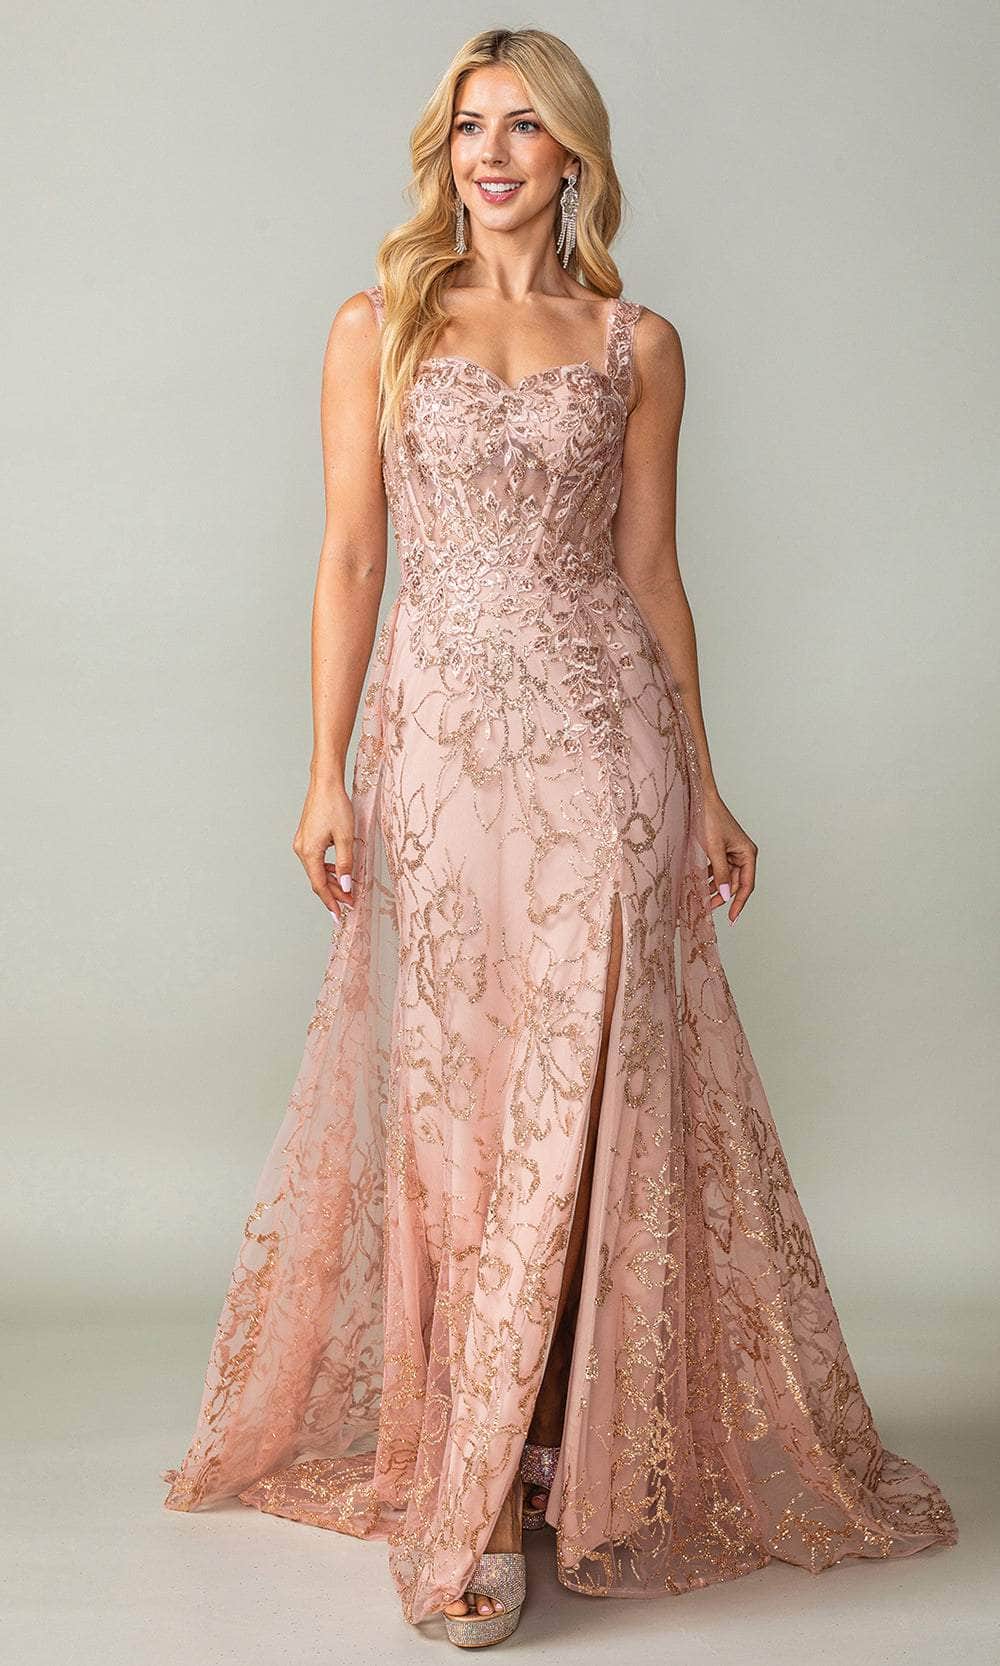 Dancing Queen 4379 - Floral Glitter Sweetheart Prom Dress Prom Dresses 